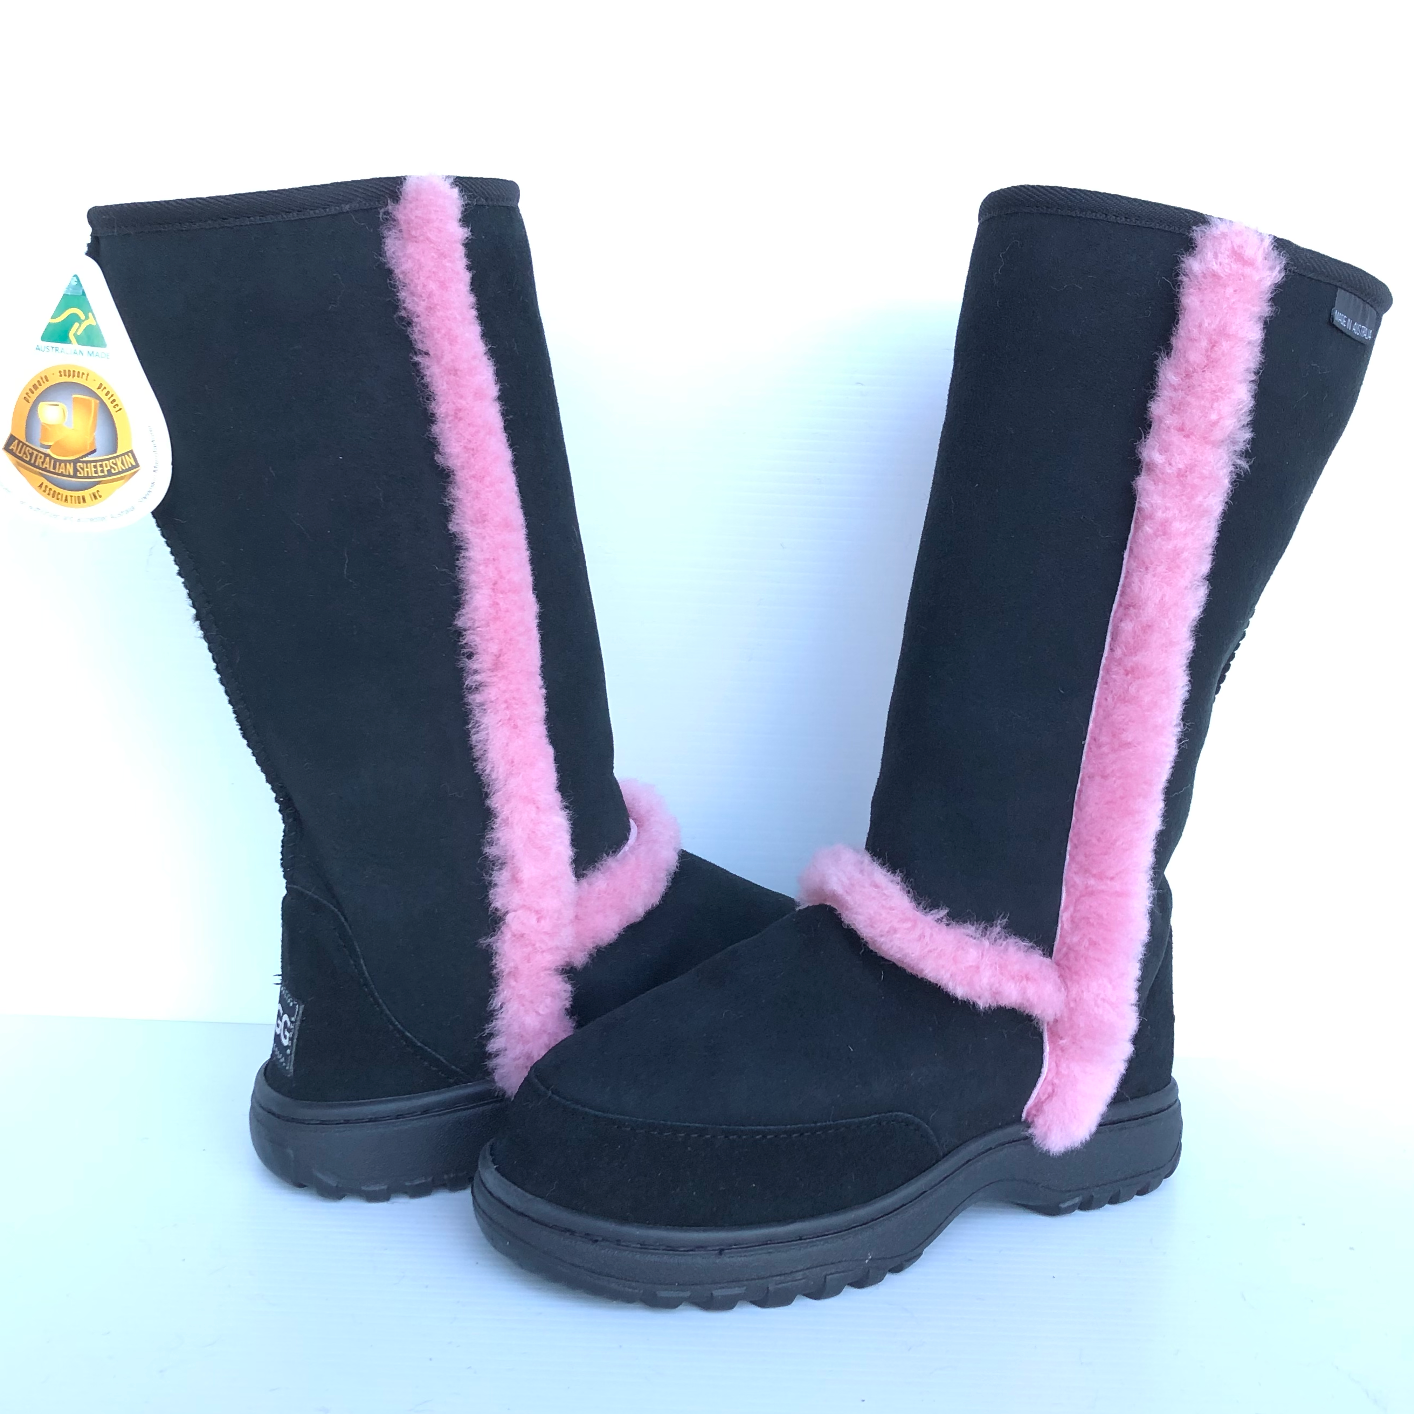 Outdoor Boots, Tall Black with Pink fluffy trim. Women's AU8